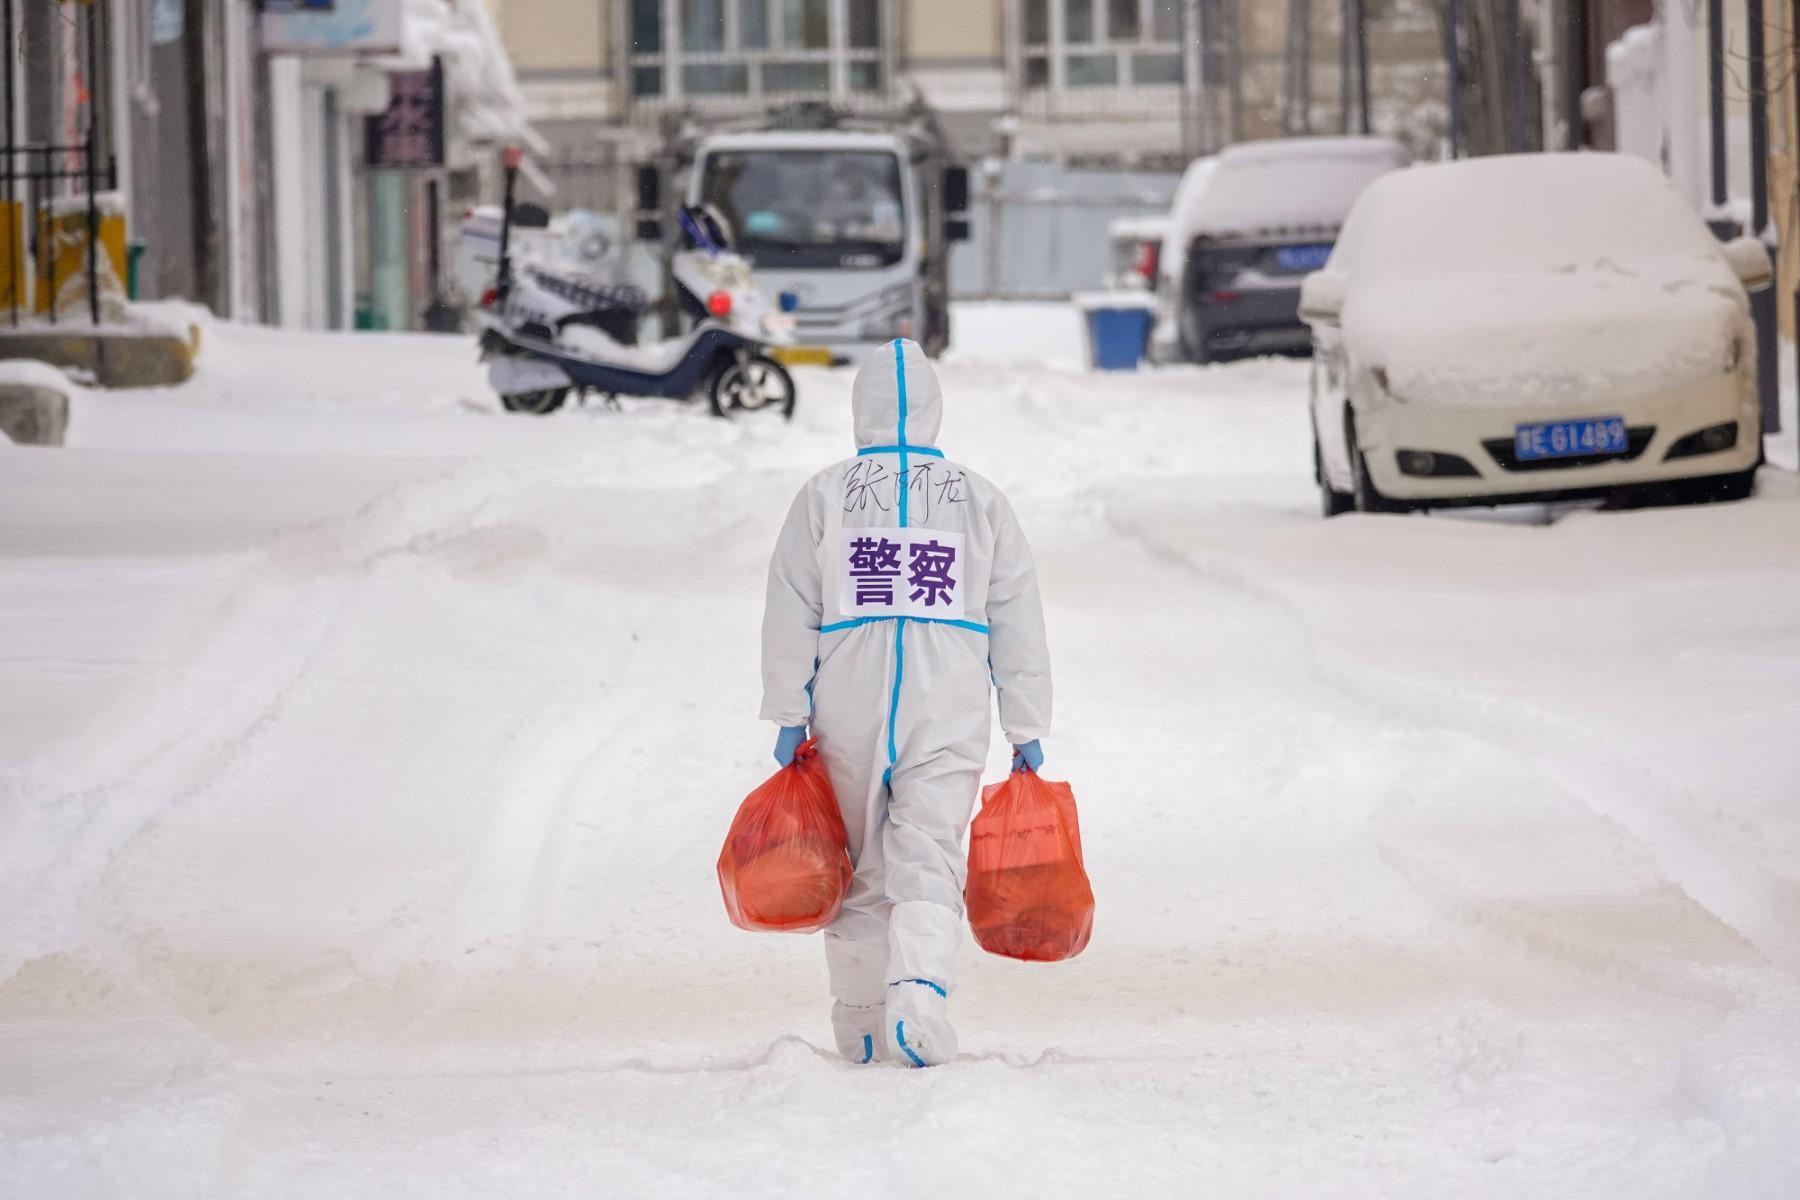 A police officer wearing personal protective equipment carries food and daily supplies that will be distributed to residents at a restricted residental area due to the spread of the Covid-19 coronavirus in Manzhouli in China's northern Inner Mongolia region on March 15. Photo: AFP